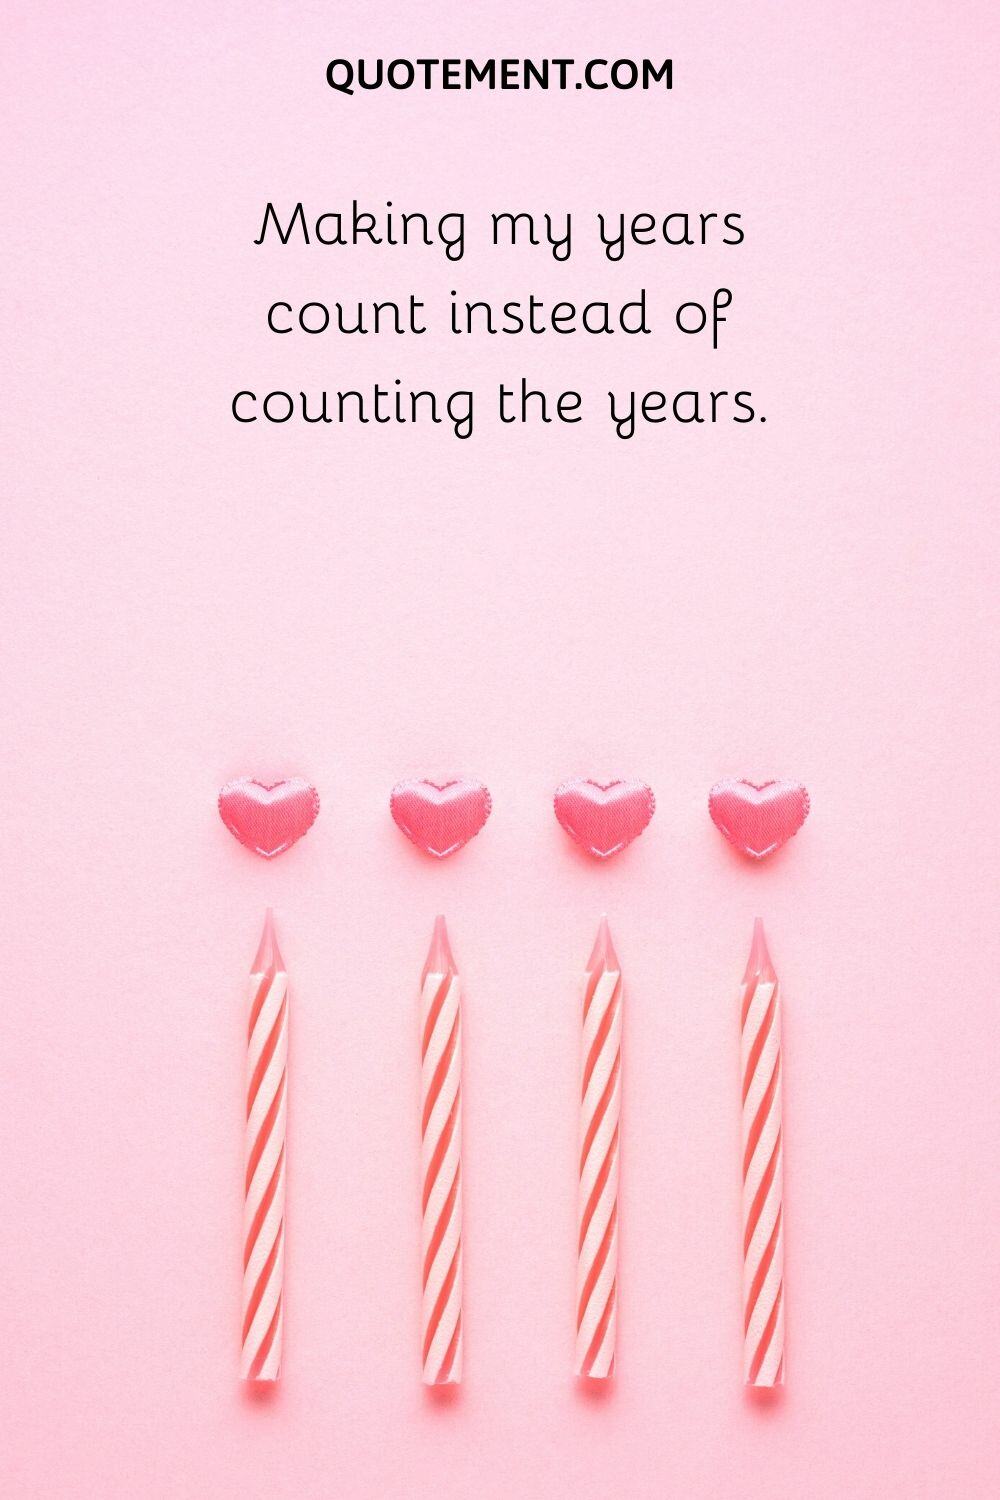 Making my years count instead of counting the years